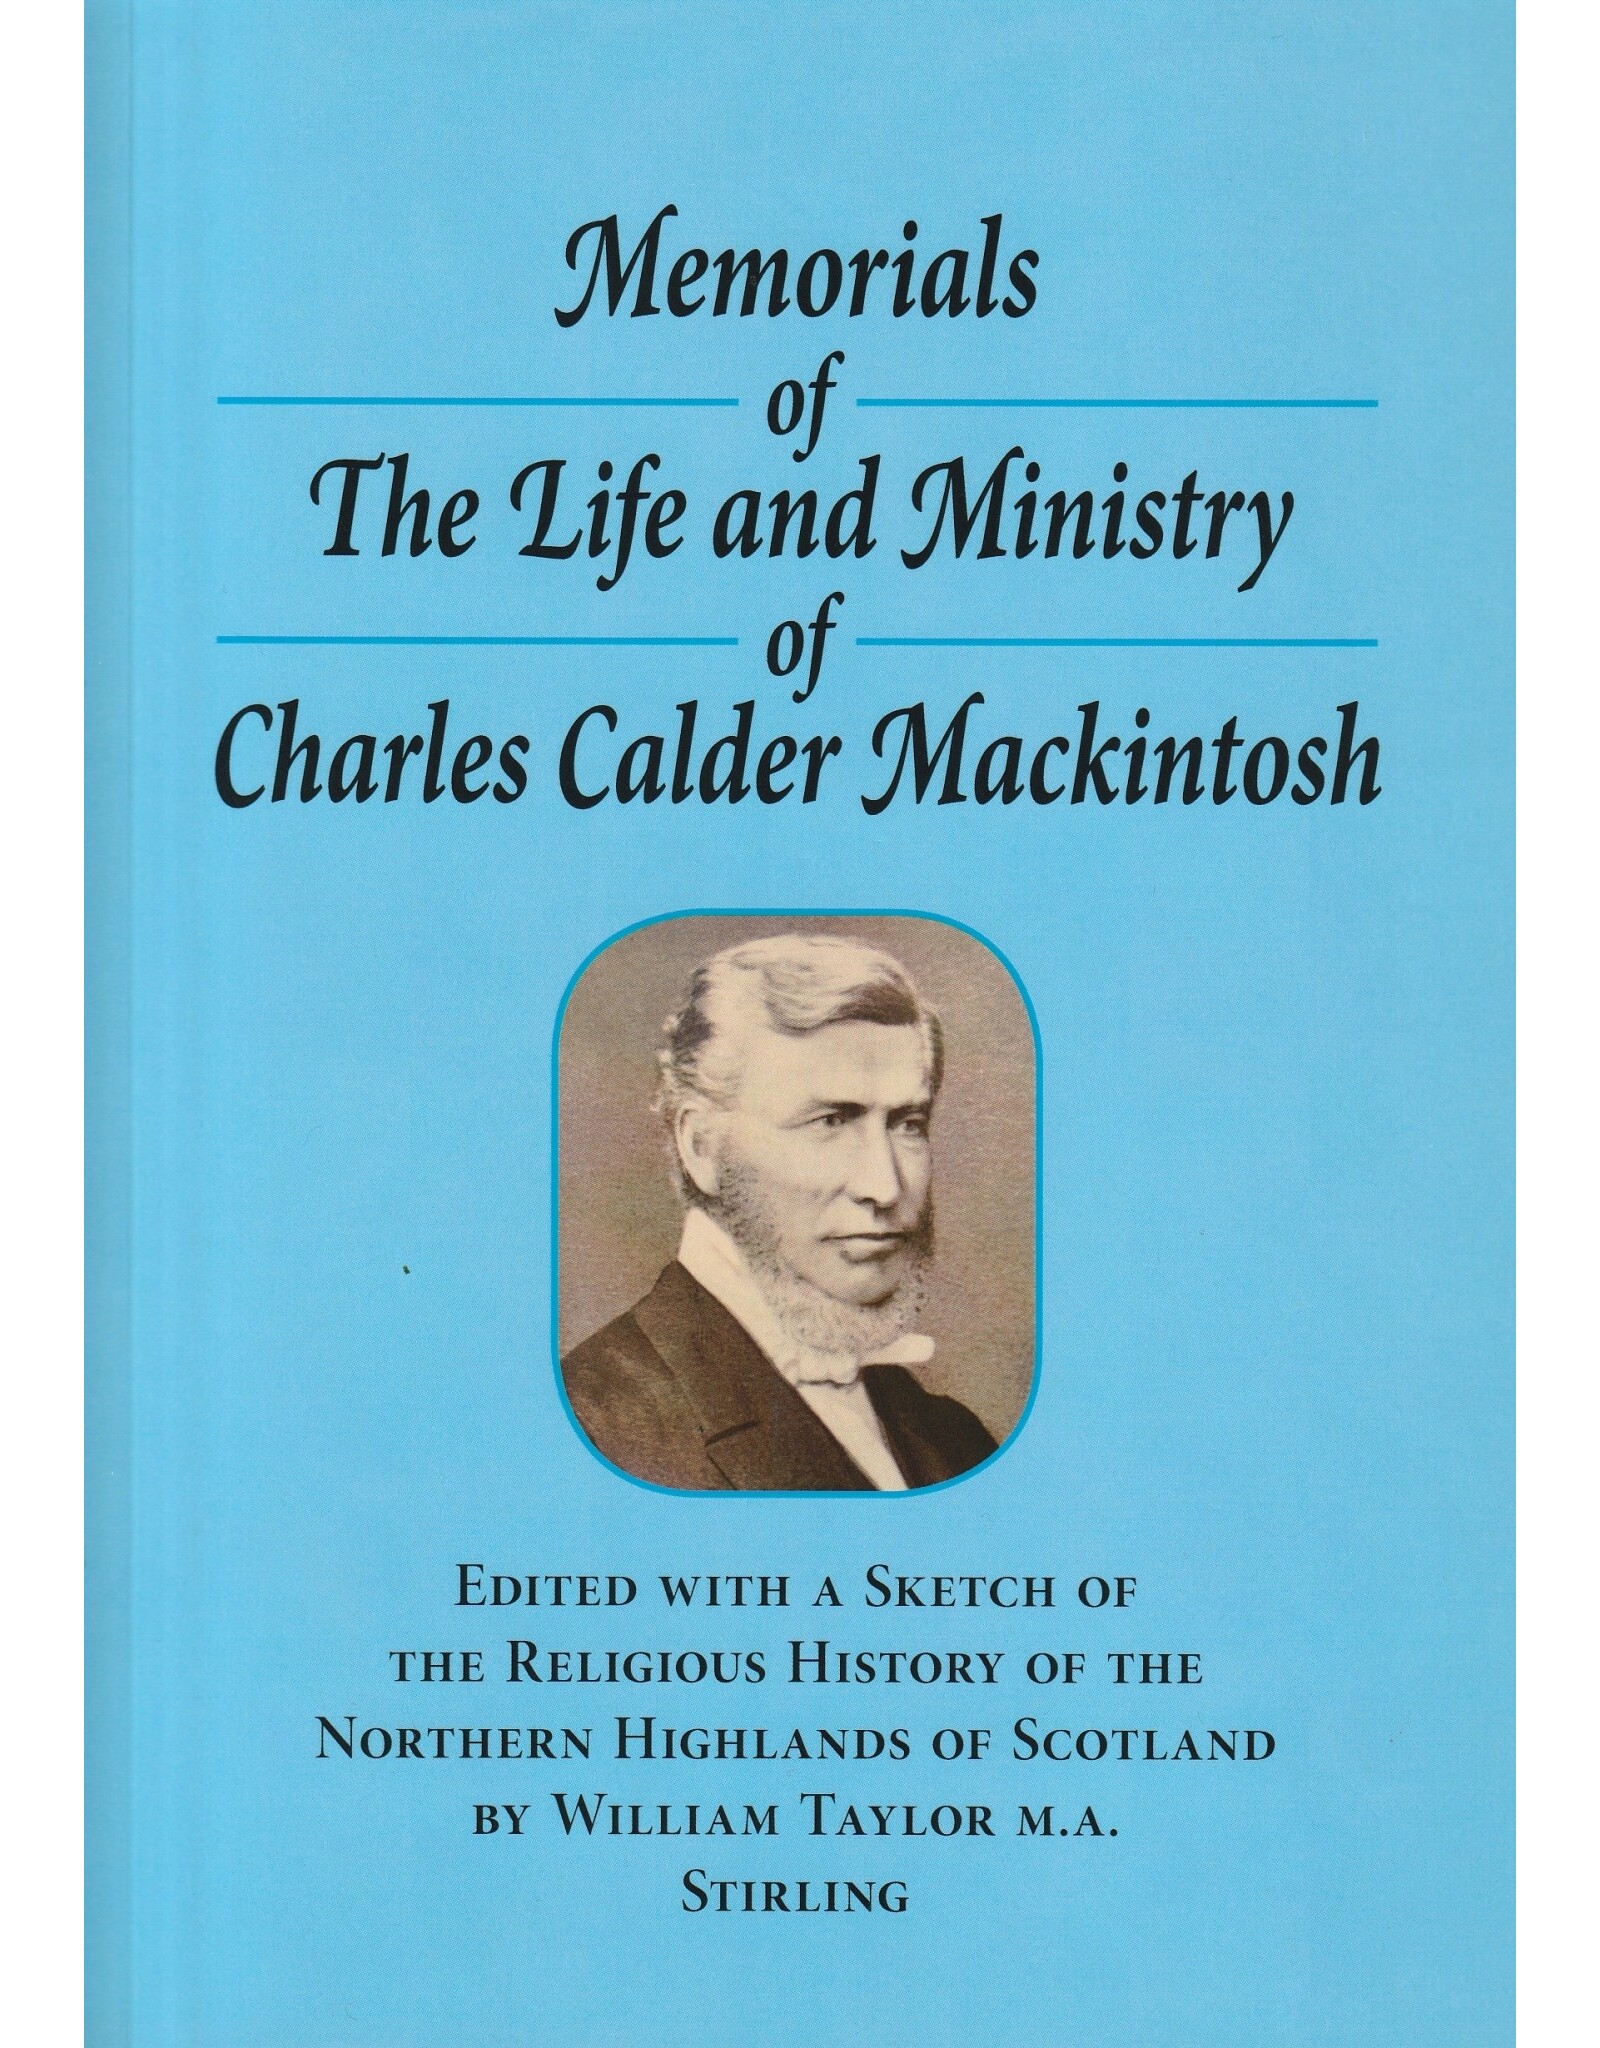 Memorials of the Life and Ministry of Charles Calder Mackintosh